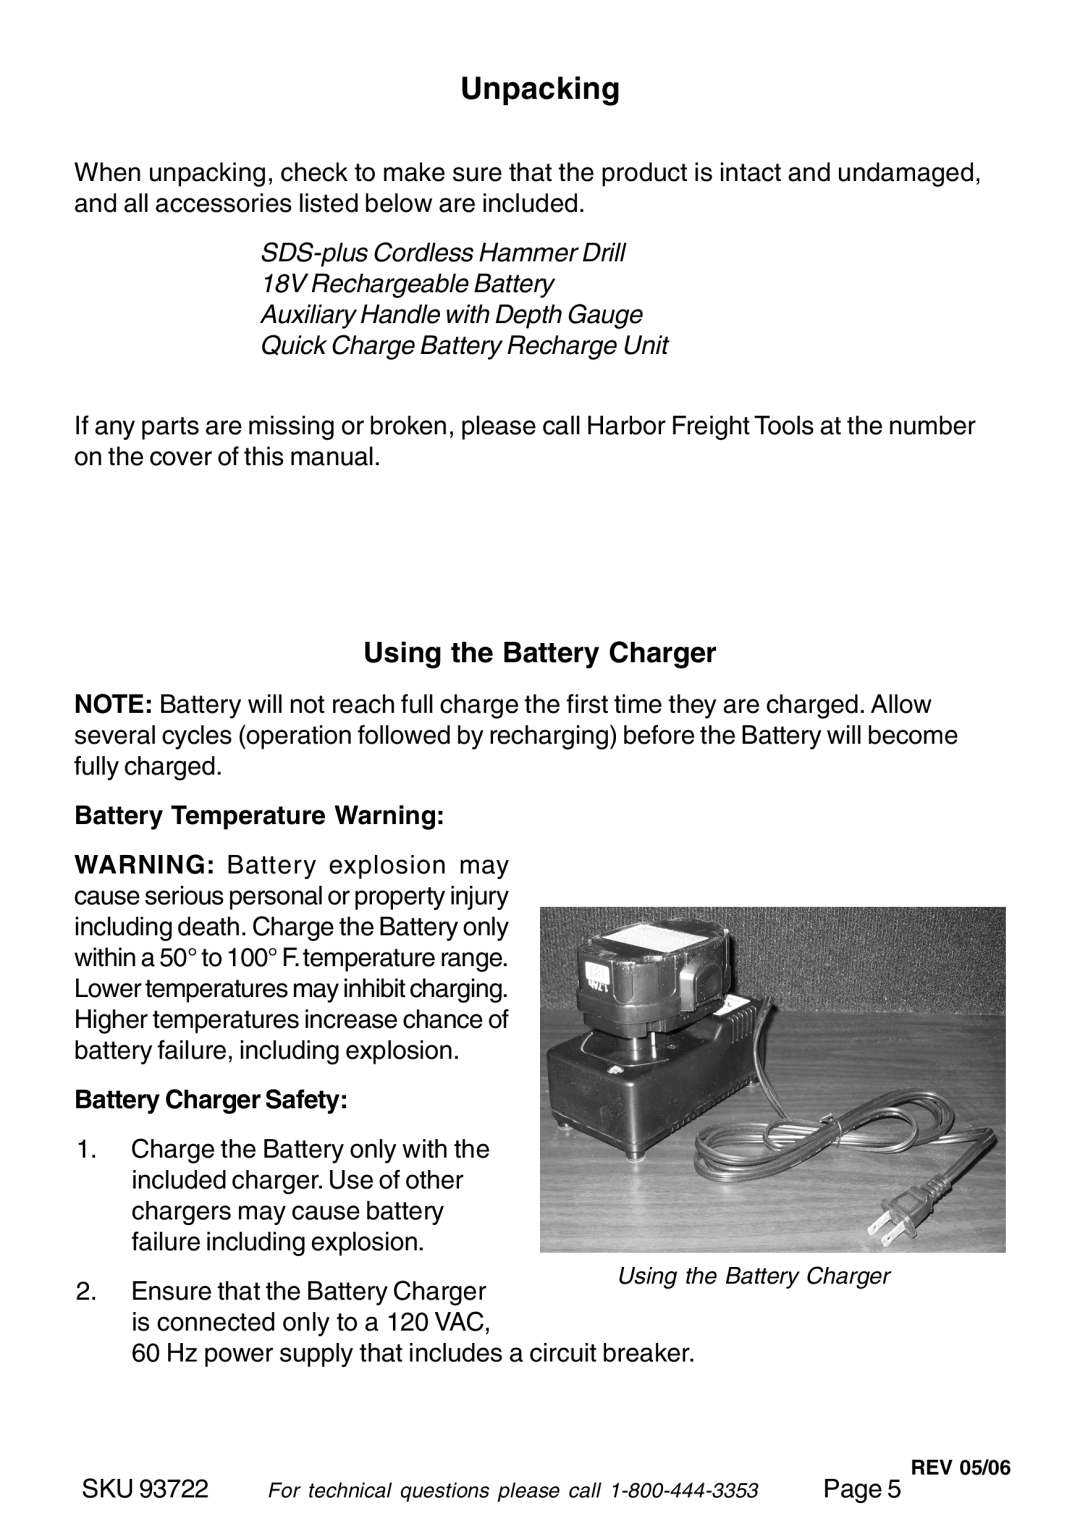 Harbor Freight Tools 93722 Unpacking, Using the Battery Charger, Battery Temperature Warning, Battery Charger Safety, Page 